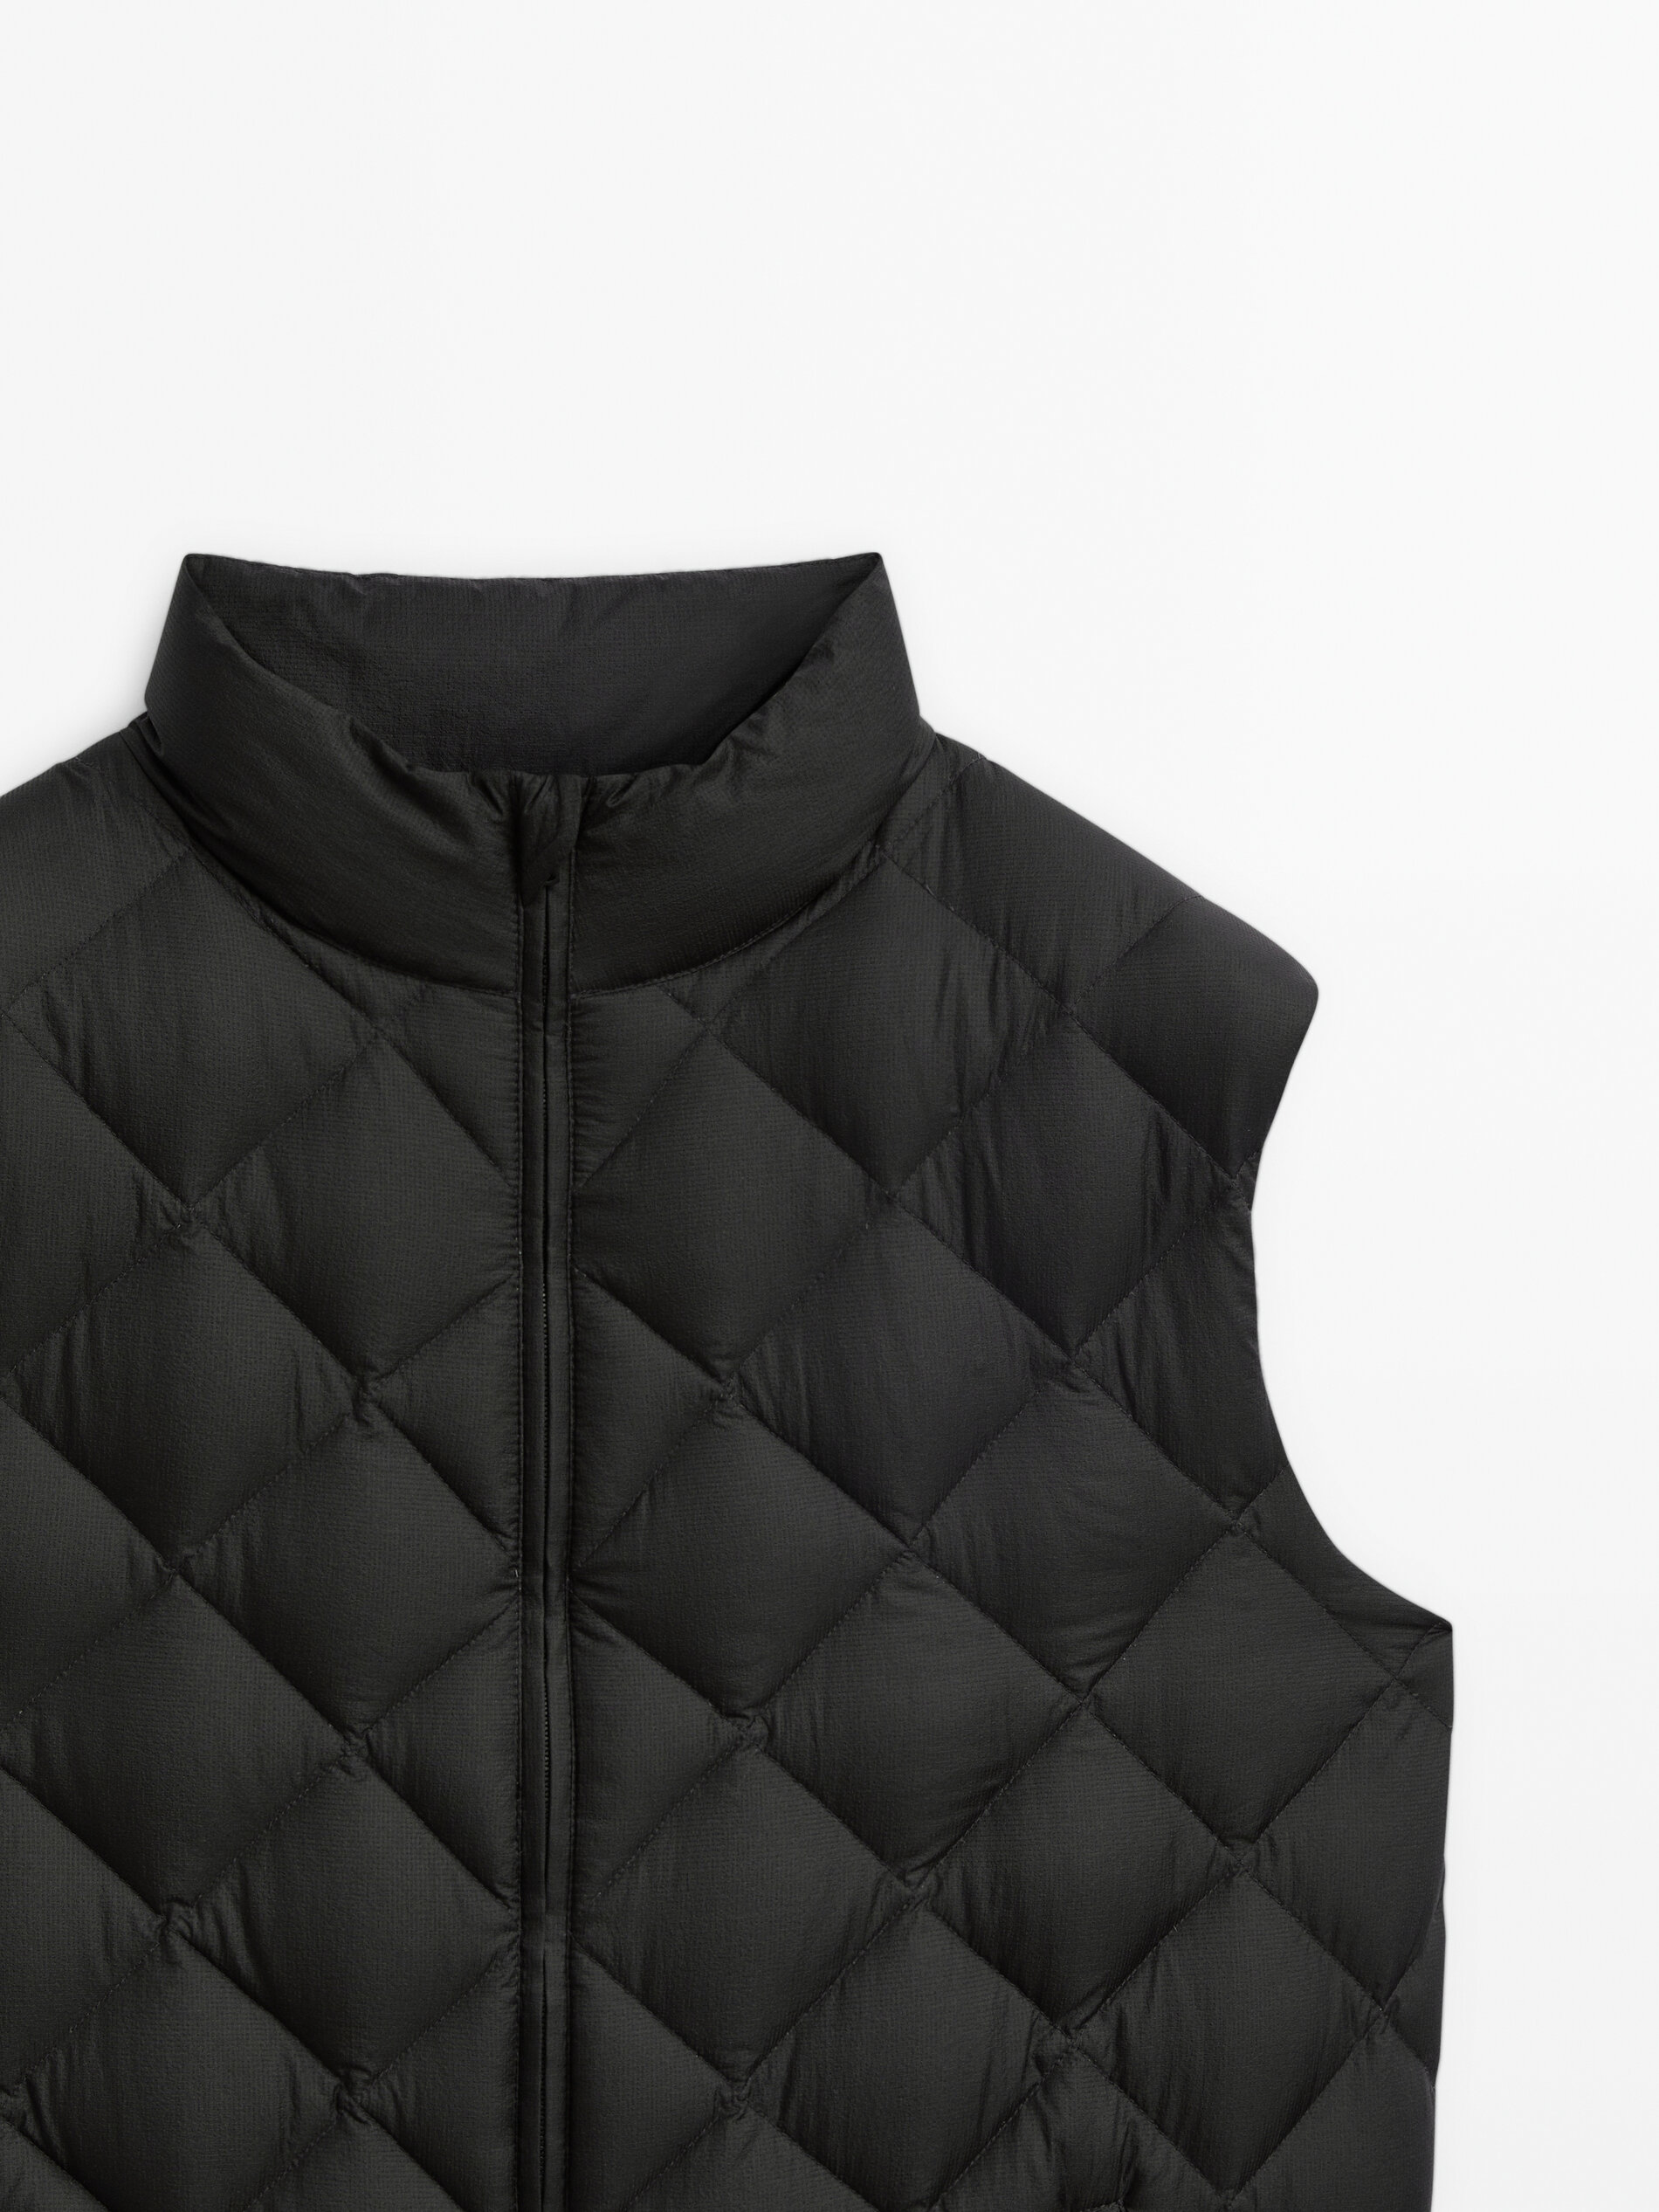 Extra lightweight ripstop gilet with down and feathers padding